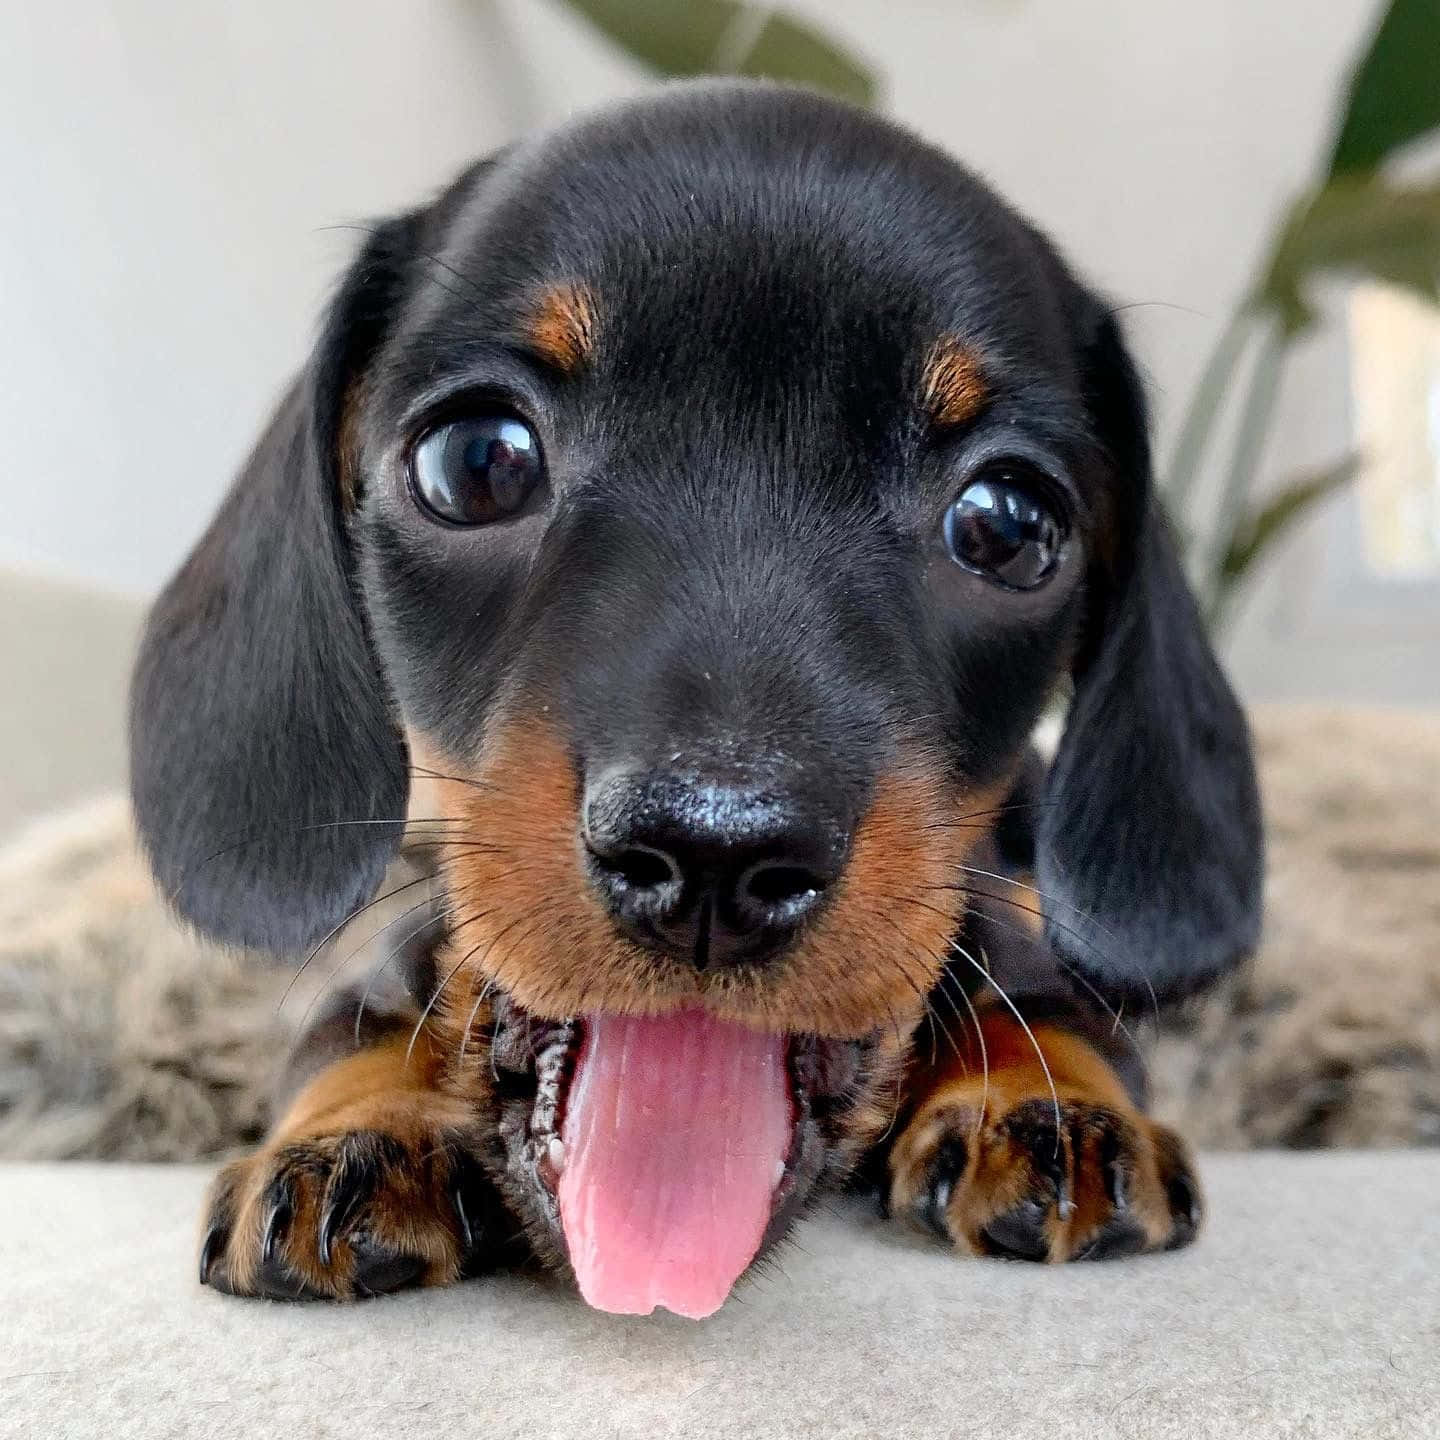 Adorable Dachshund Puppy Gazing Up with Big Brown Eyes